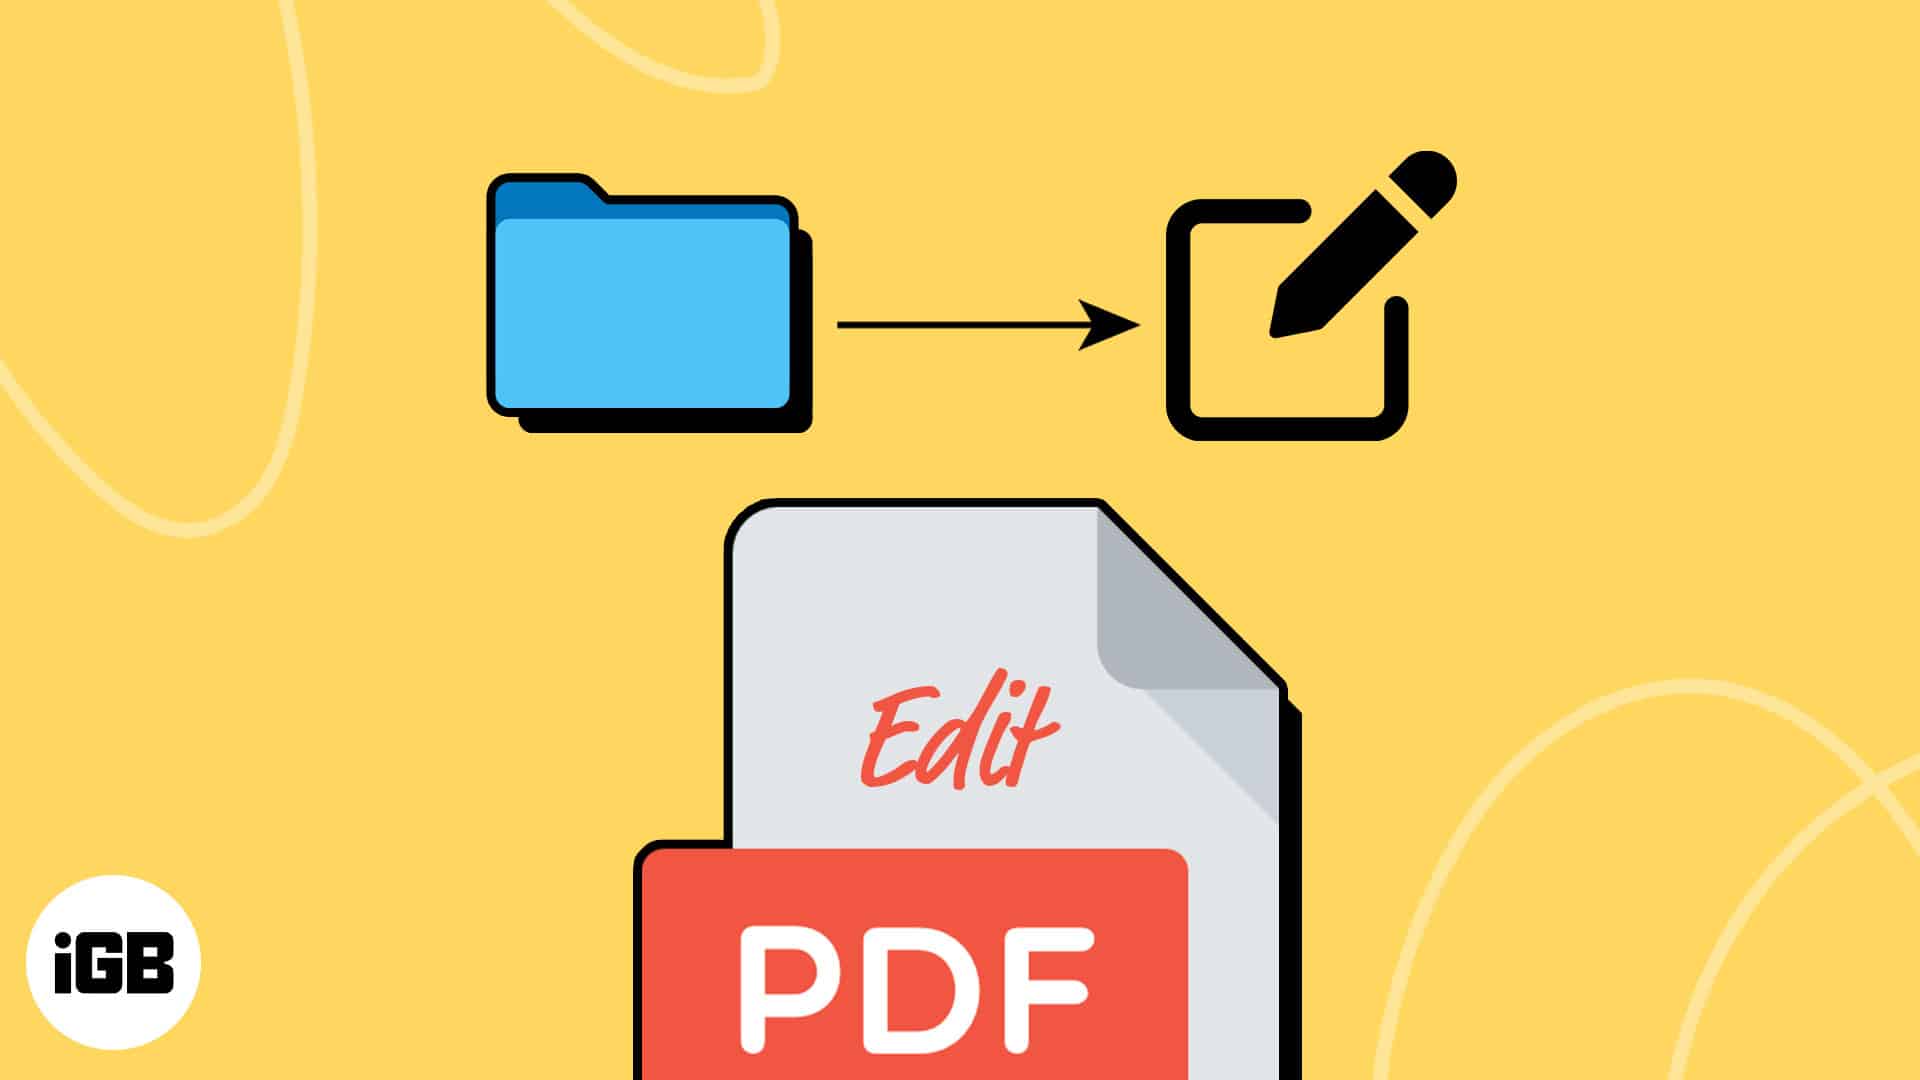 How to edit pdfs on iphone and ipad